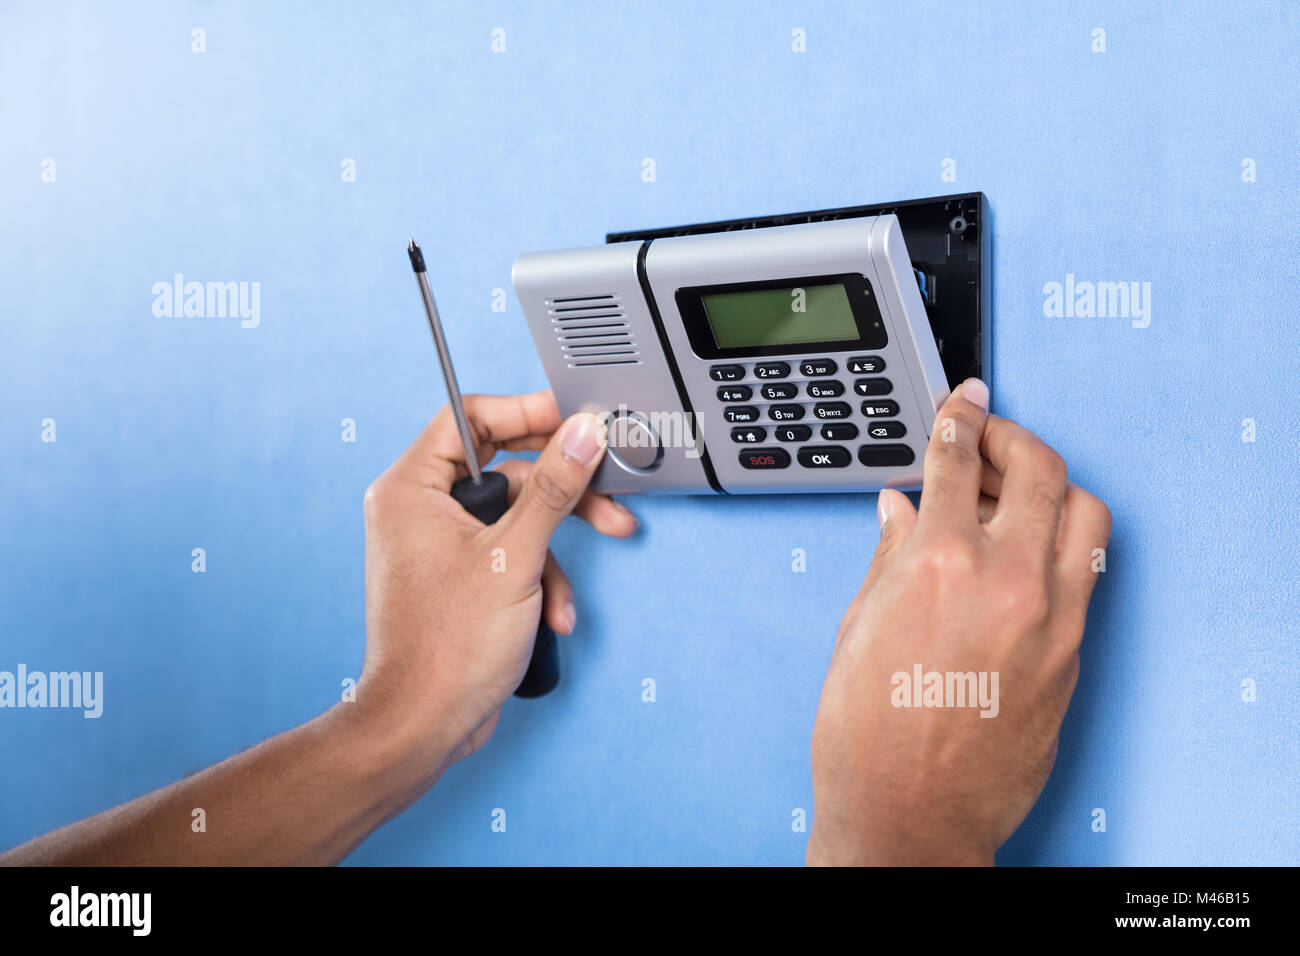 Human Hand Installing Security System On Blue Wall Stock Photo